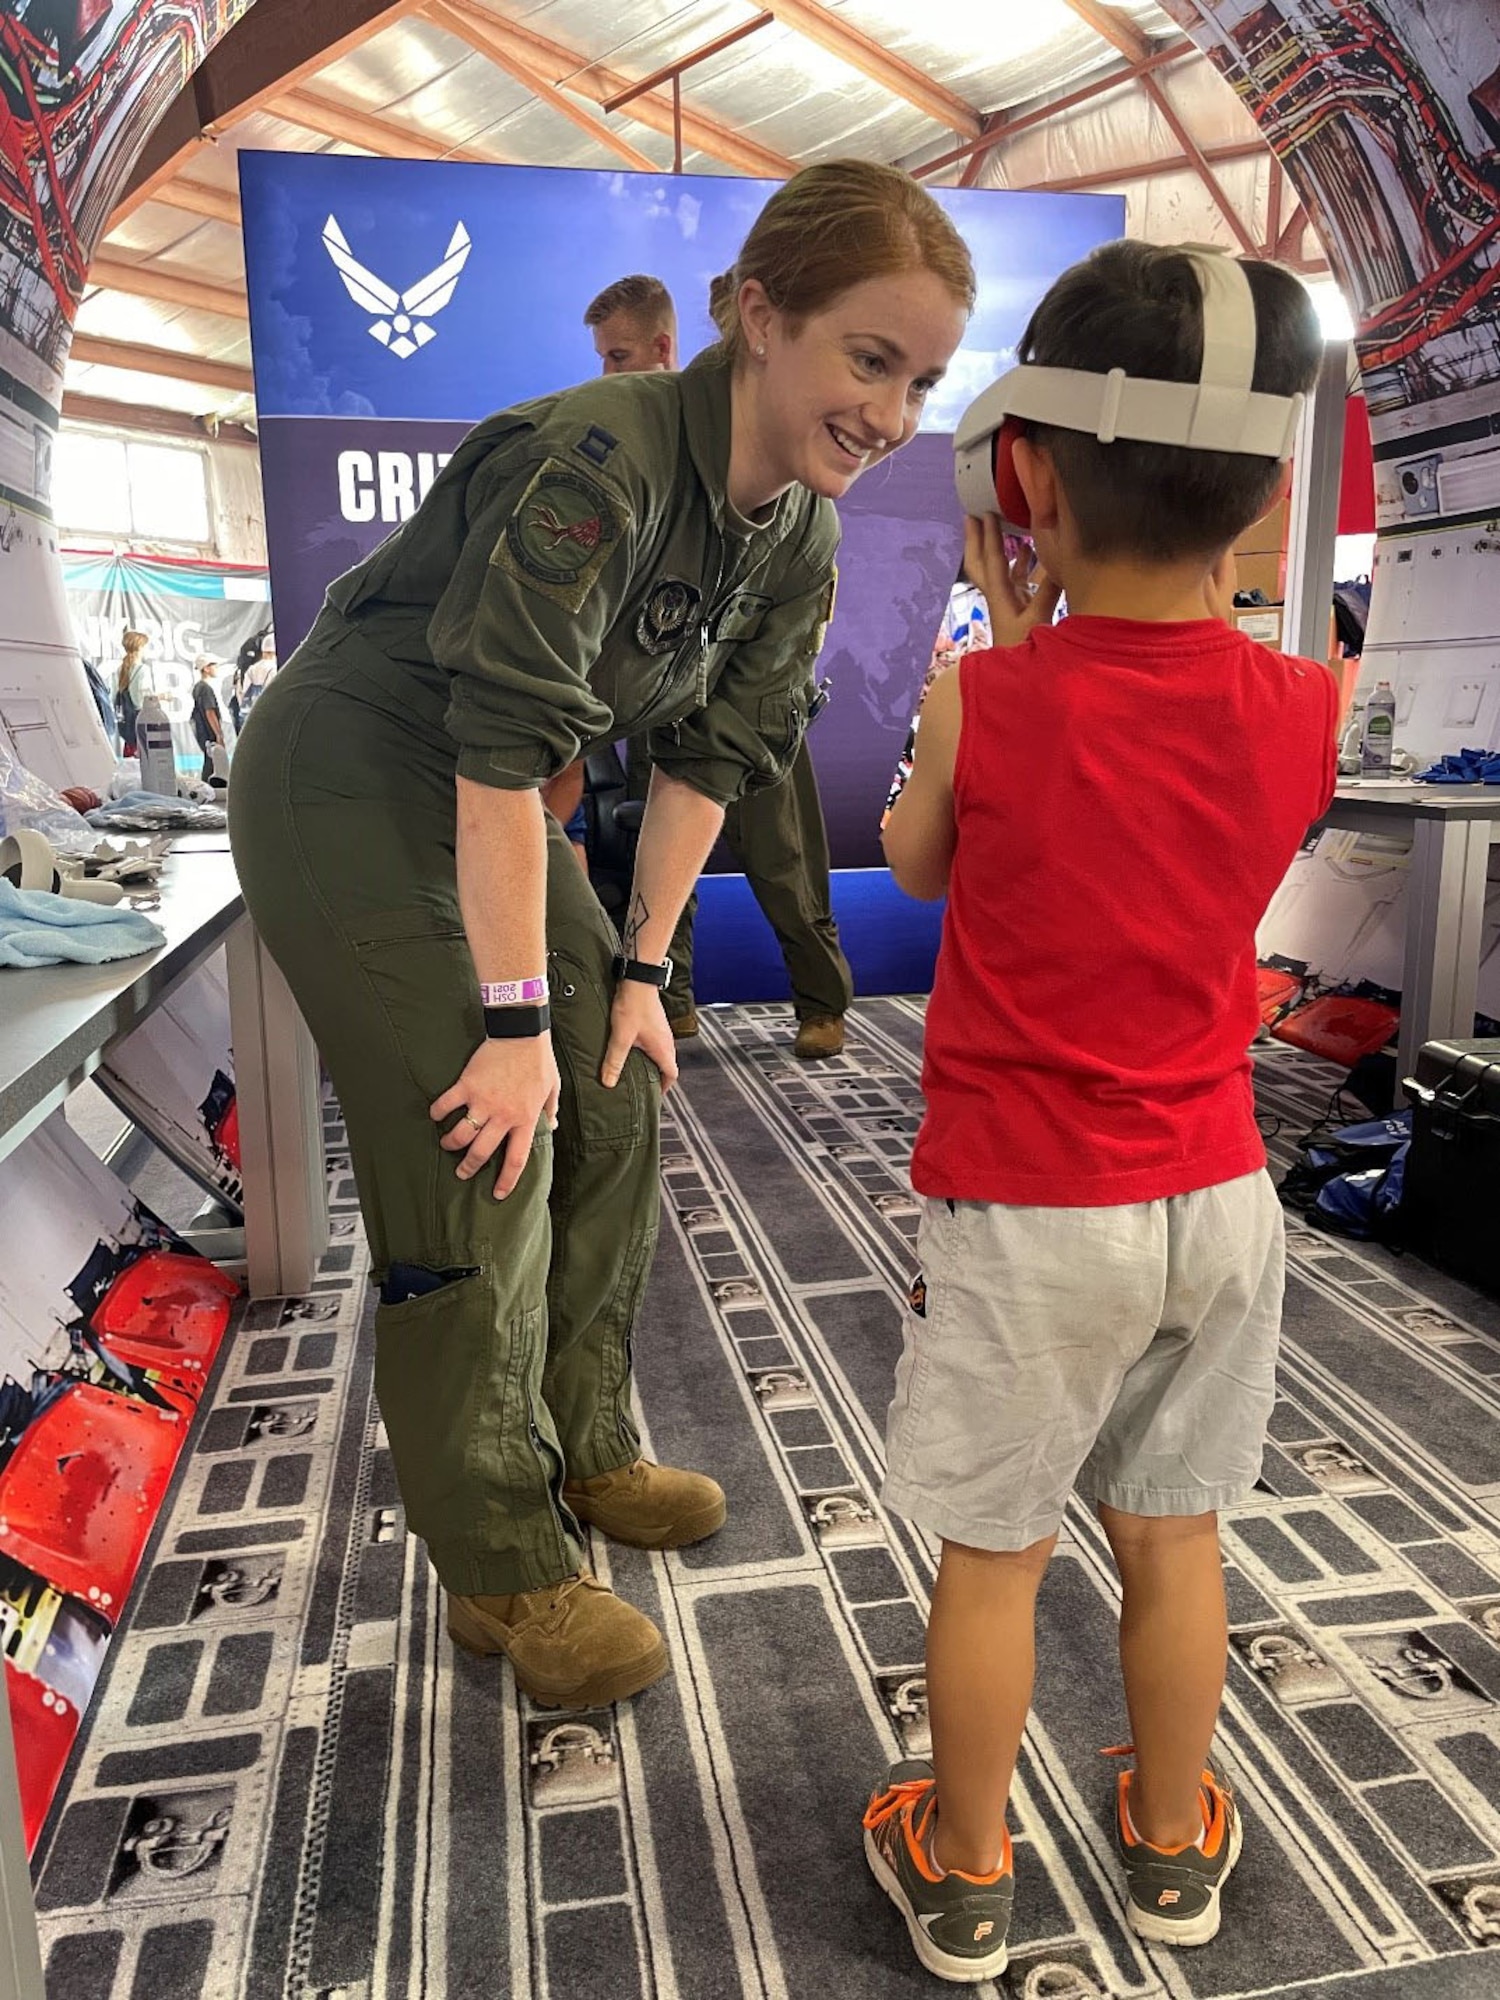 An RPA pilot, shows a student attending the Experimental Aircraft Association (EAA) AirVenture Air Show what an experience it is to operate an F-16 Fighting Falcon from the perspective of a 360 degree video through a virtual reality headset at Oshkosh, Wis., July 26, 2021.